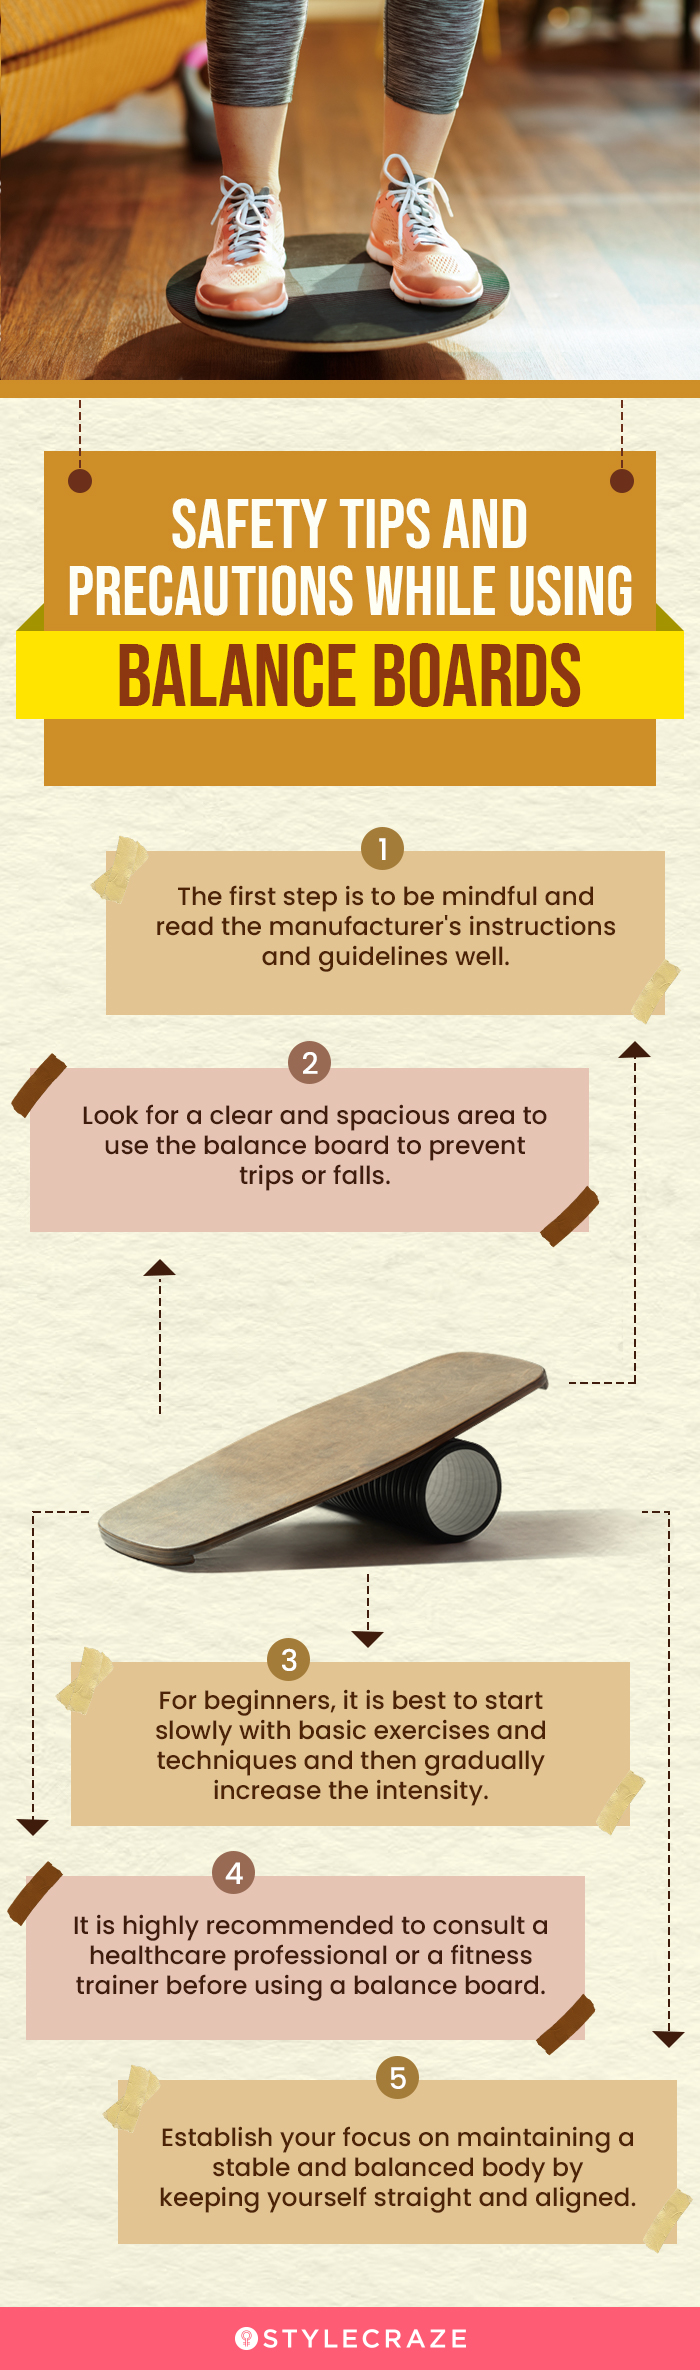 Safety Tips And Precautions While Using Balance Boards (infographic)